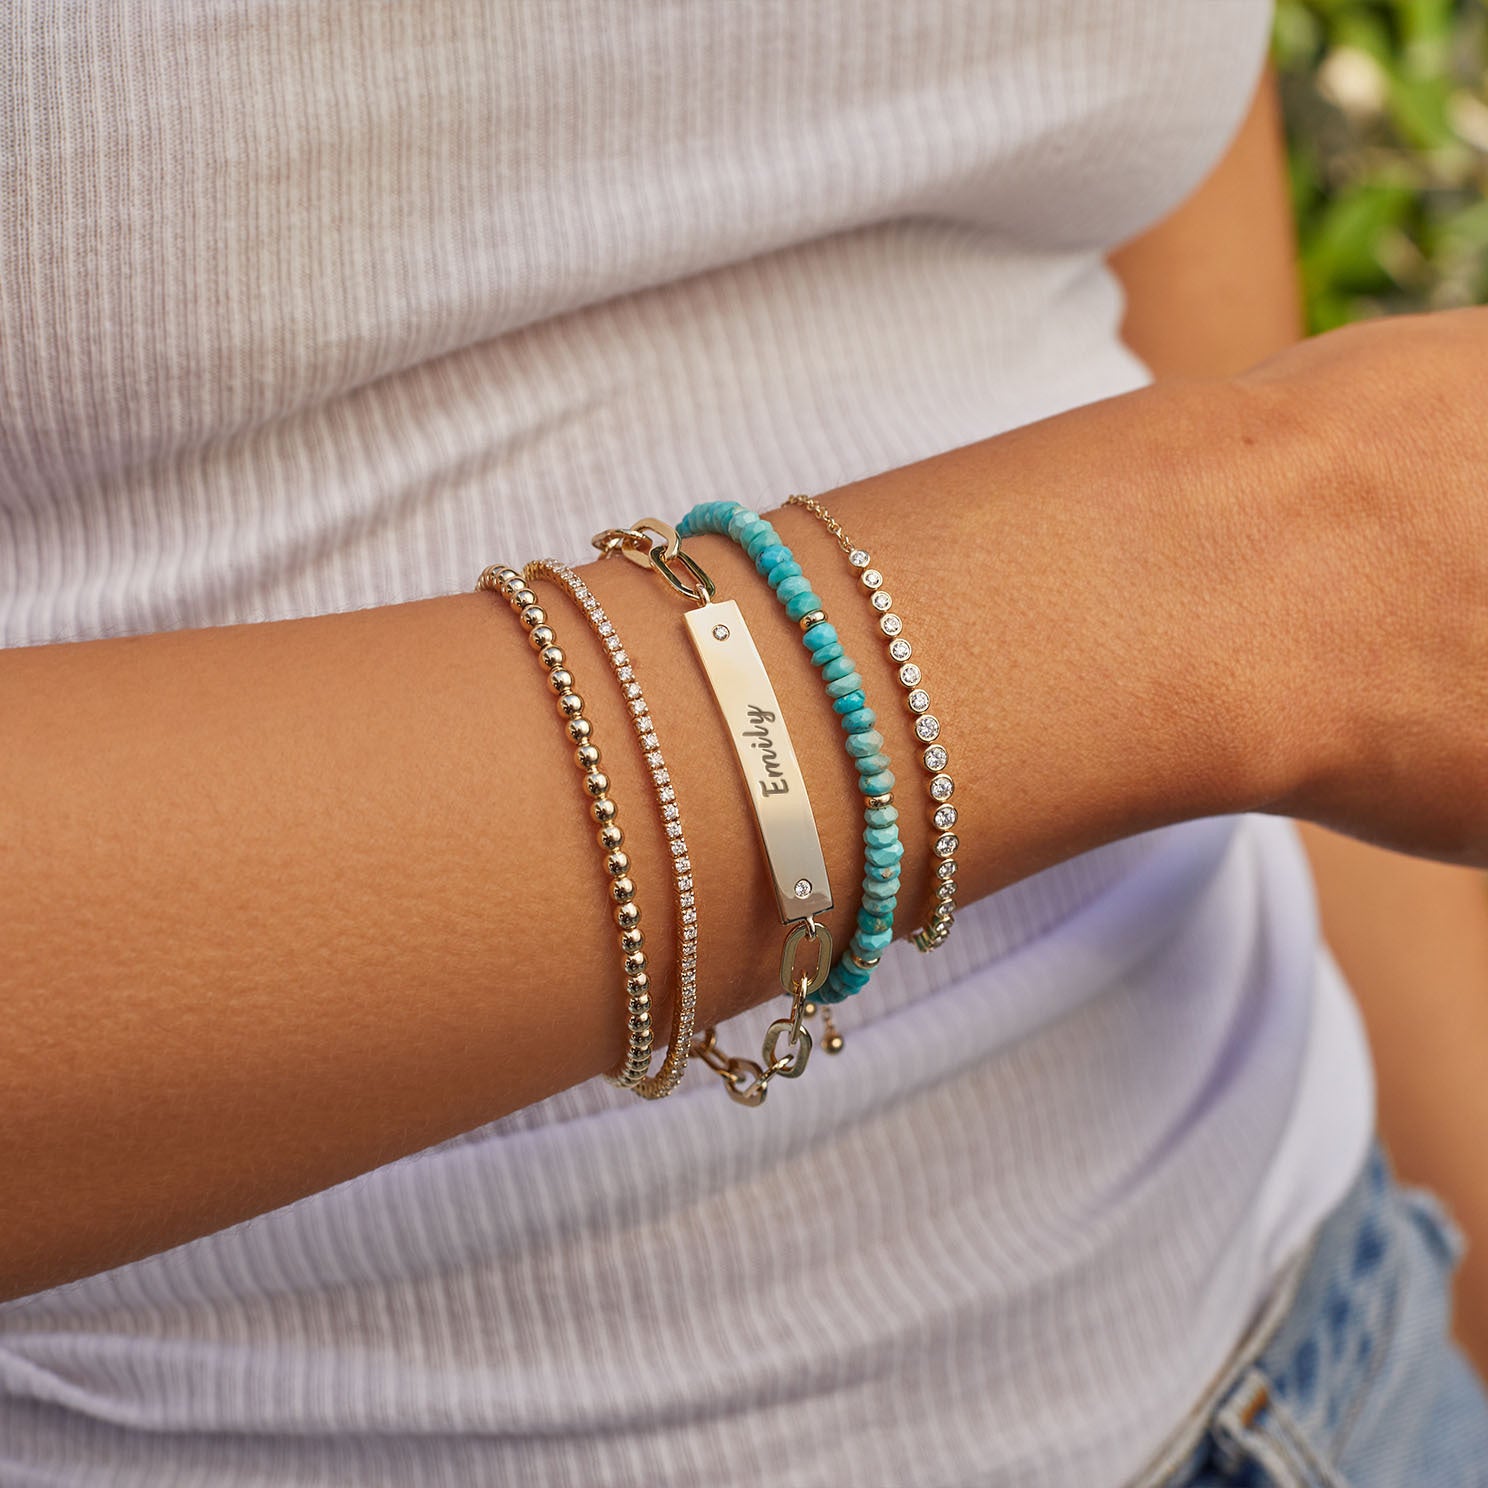 Nameplate Jumbo Link Bracelet in 14k yellow gold engraved with initials EMILY in script font styled on wrist of model with gold, diamond, and birthstone bead bracelets